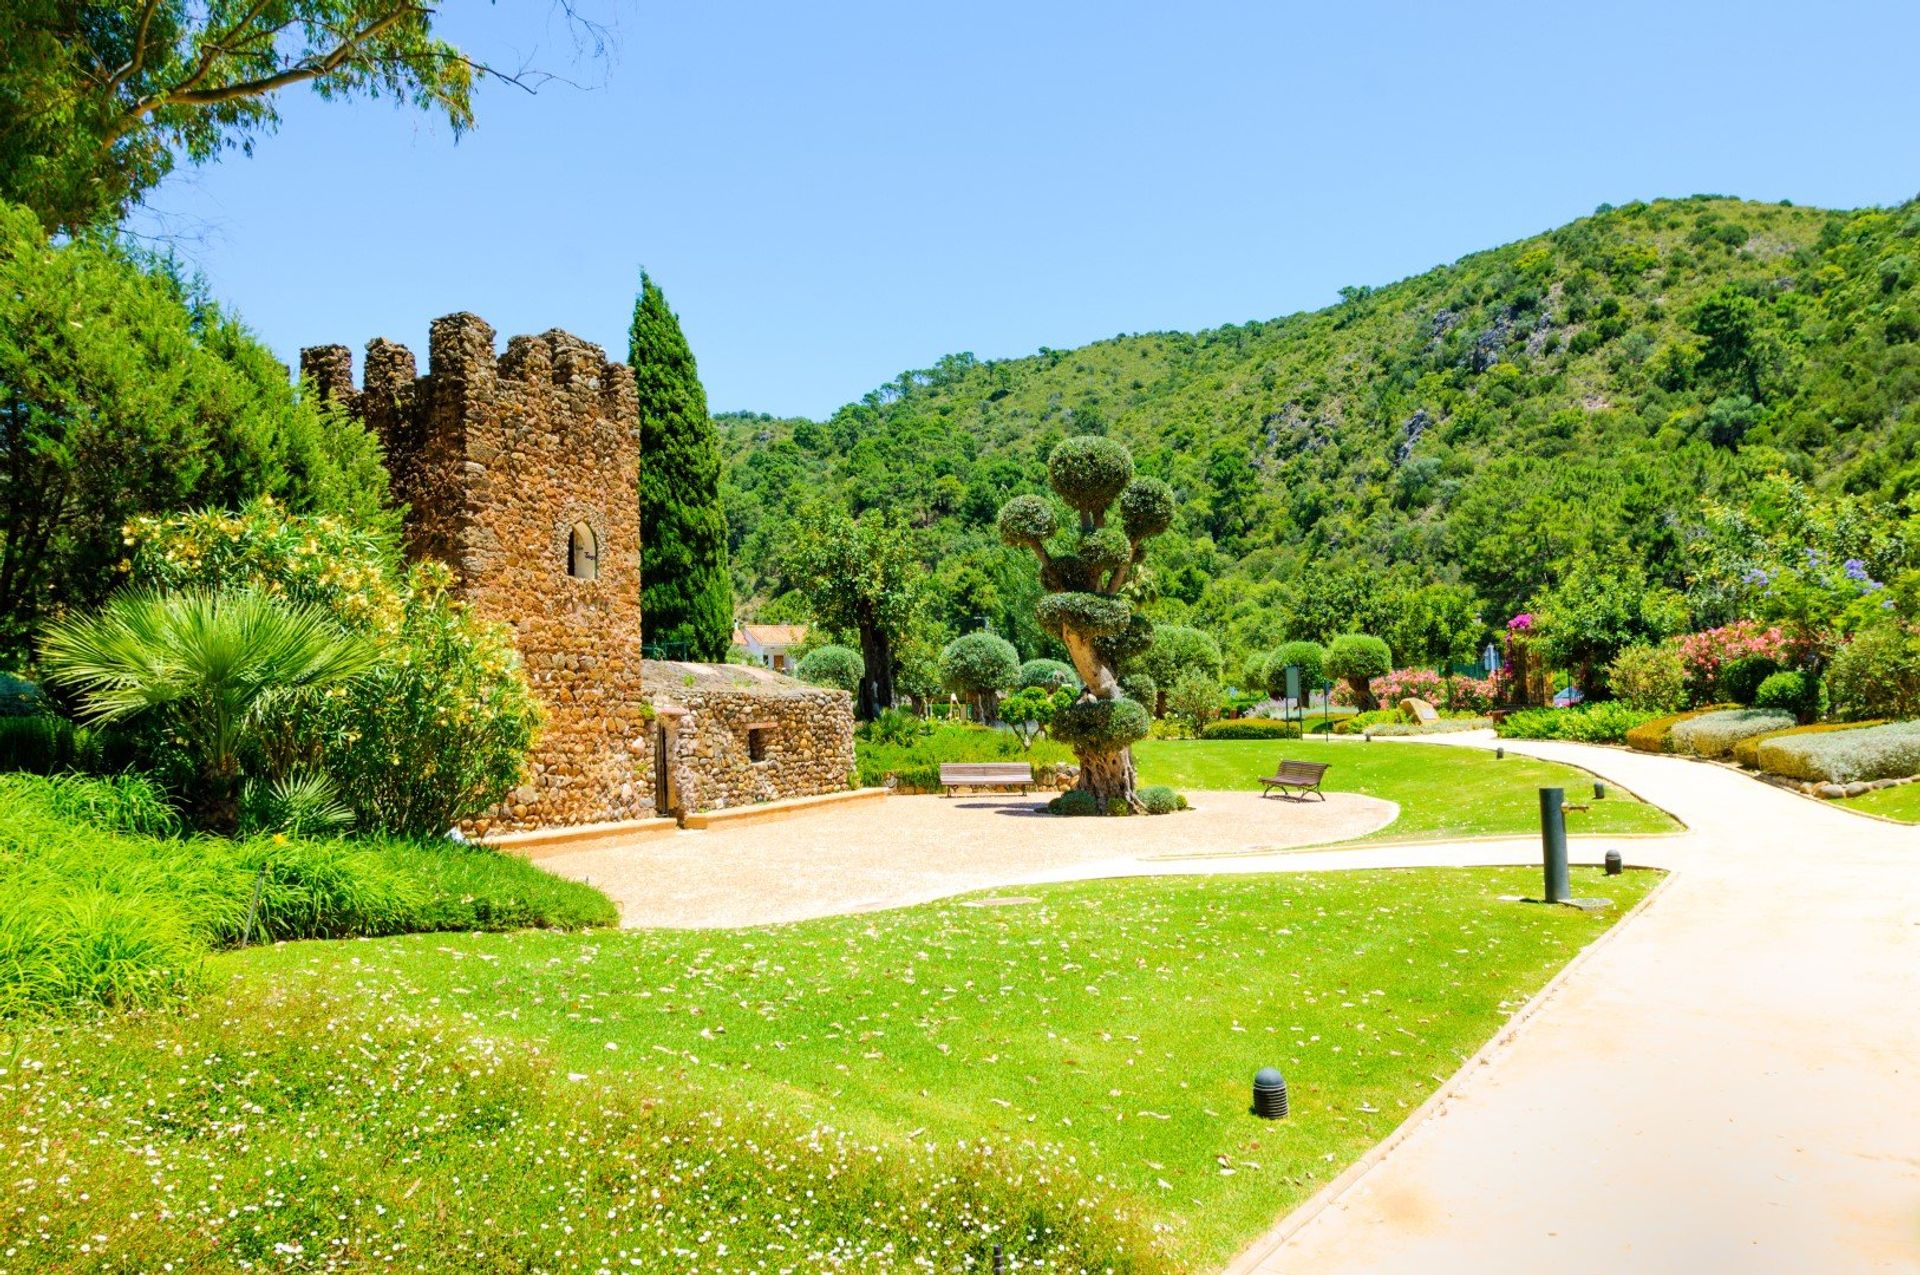 11th century Montemayor Castle boasts scenic views of the surrounding countryside from the top